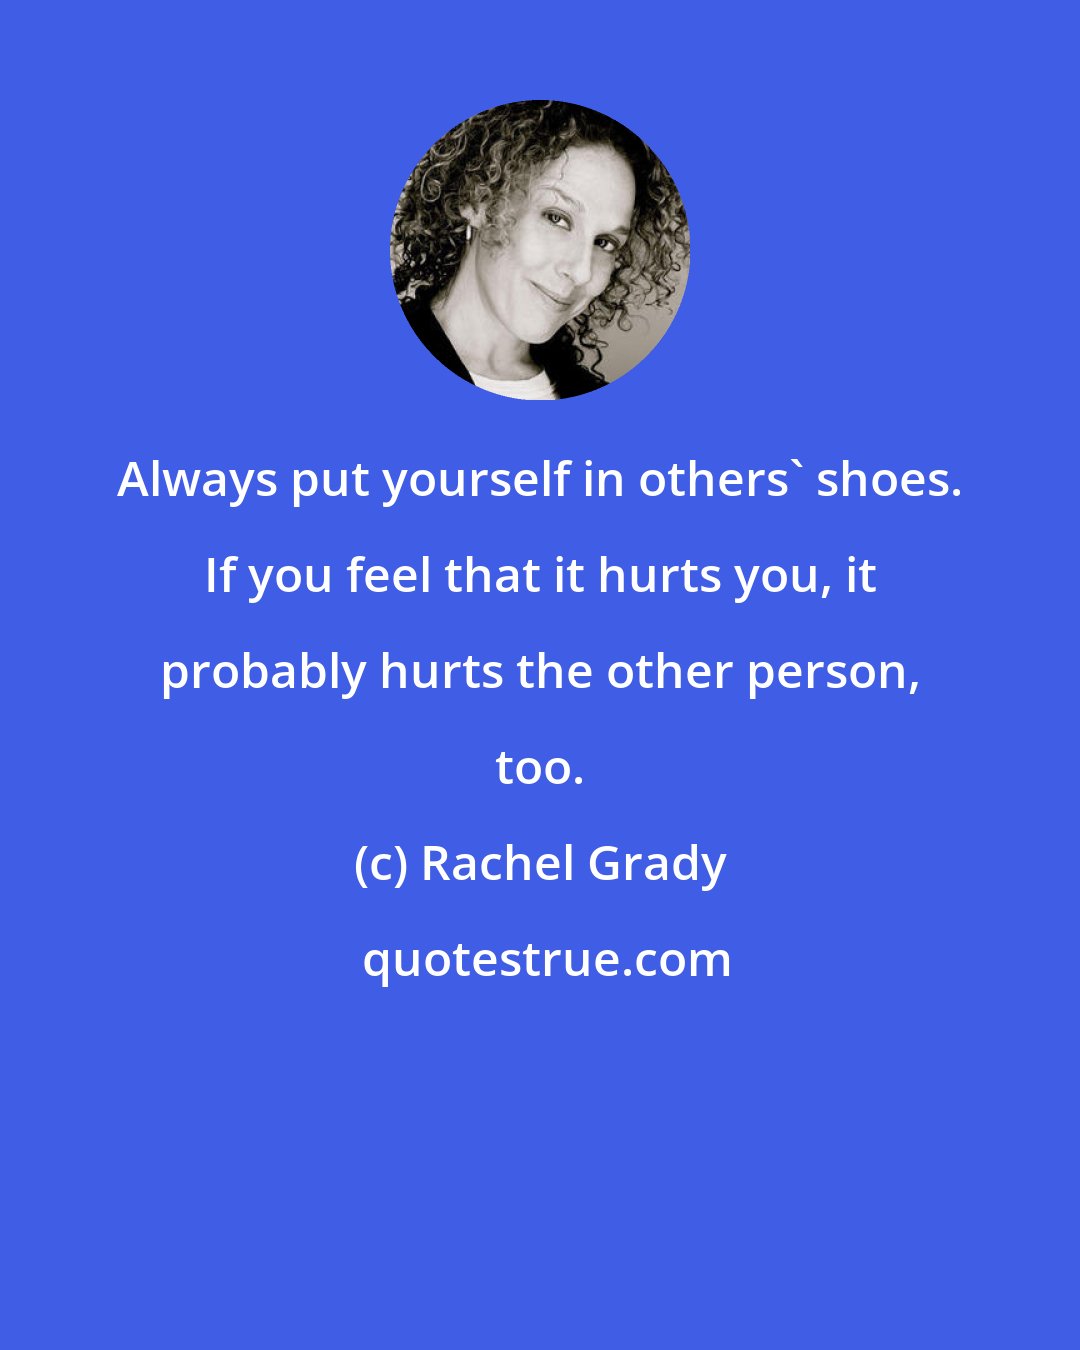 Rachel Grady: Always put yourself in others' shoes. If you feel that it hurts you, it probably hurts the other person, too.